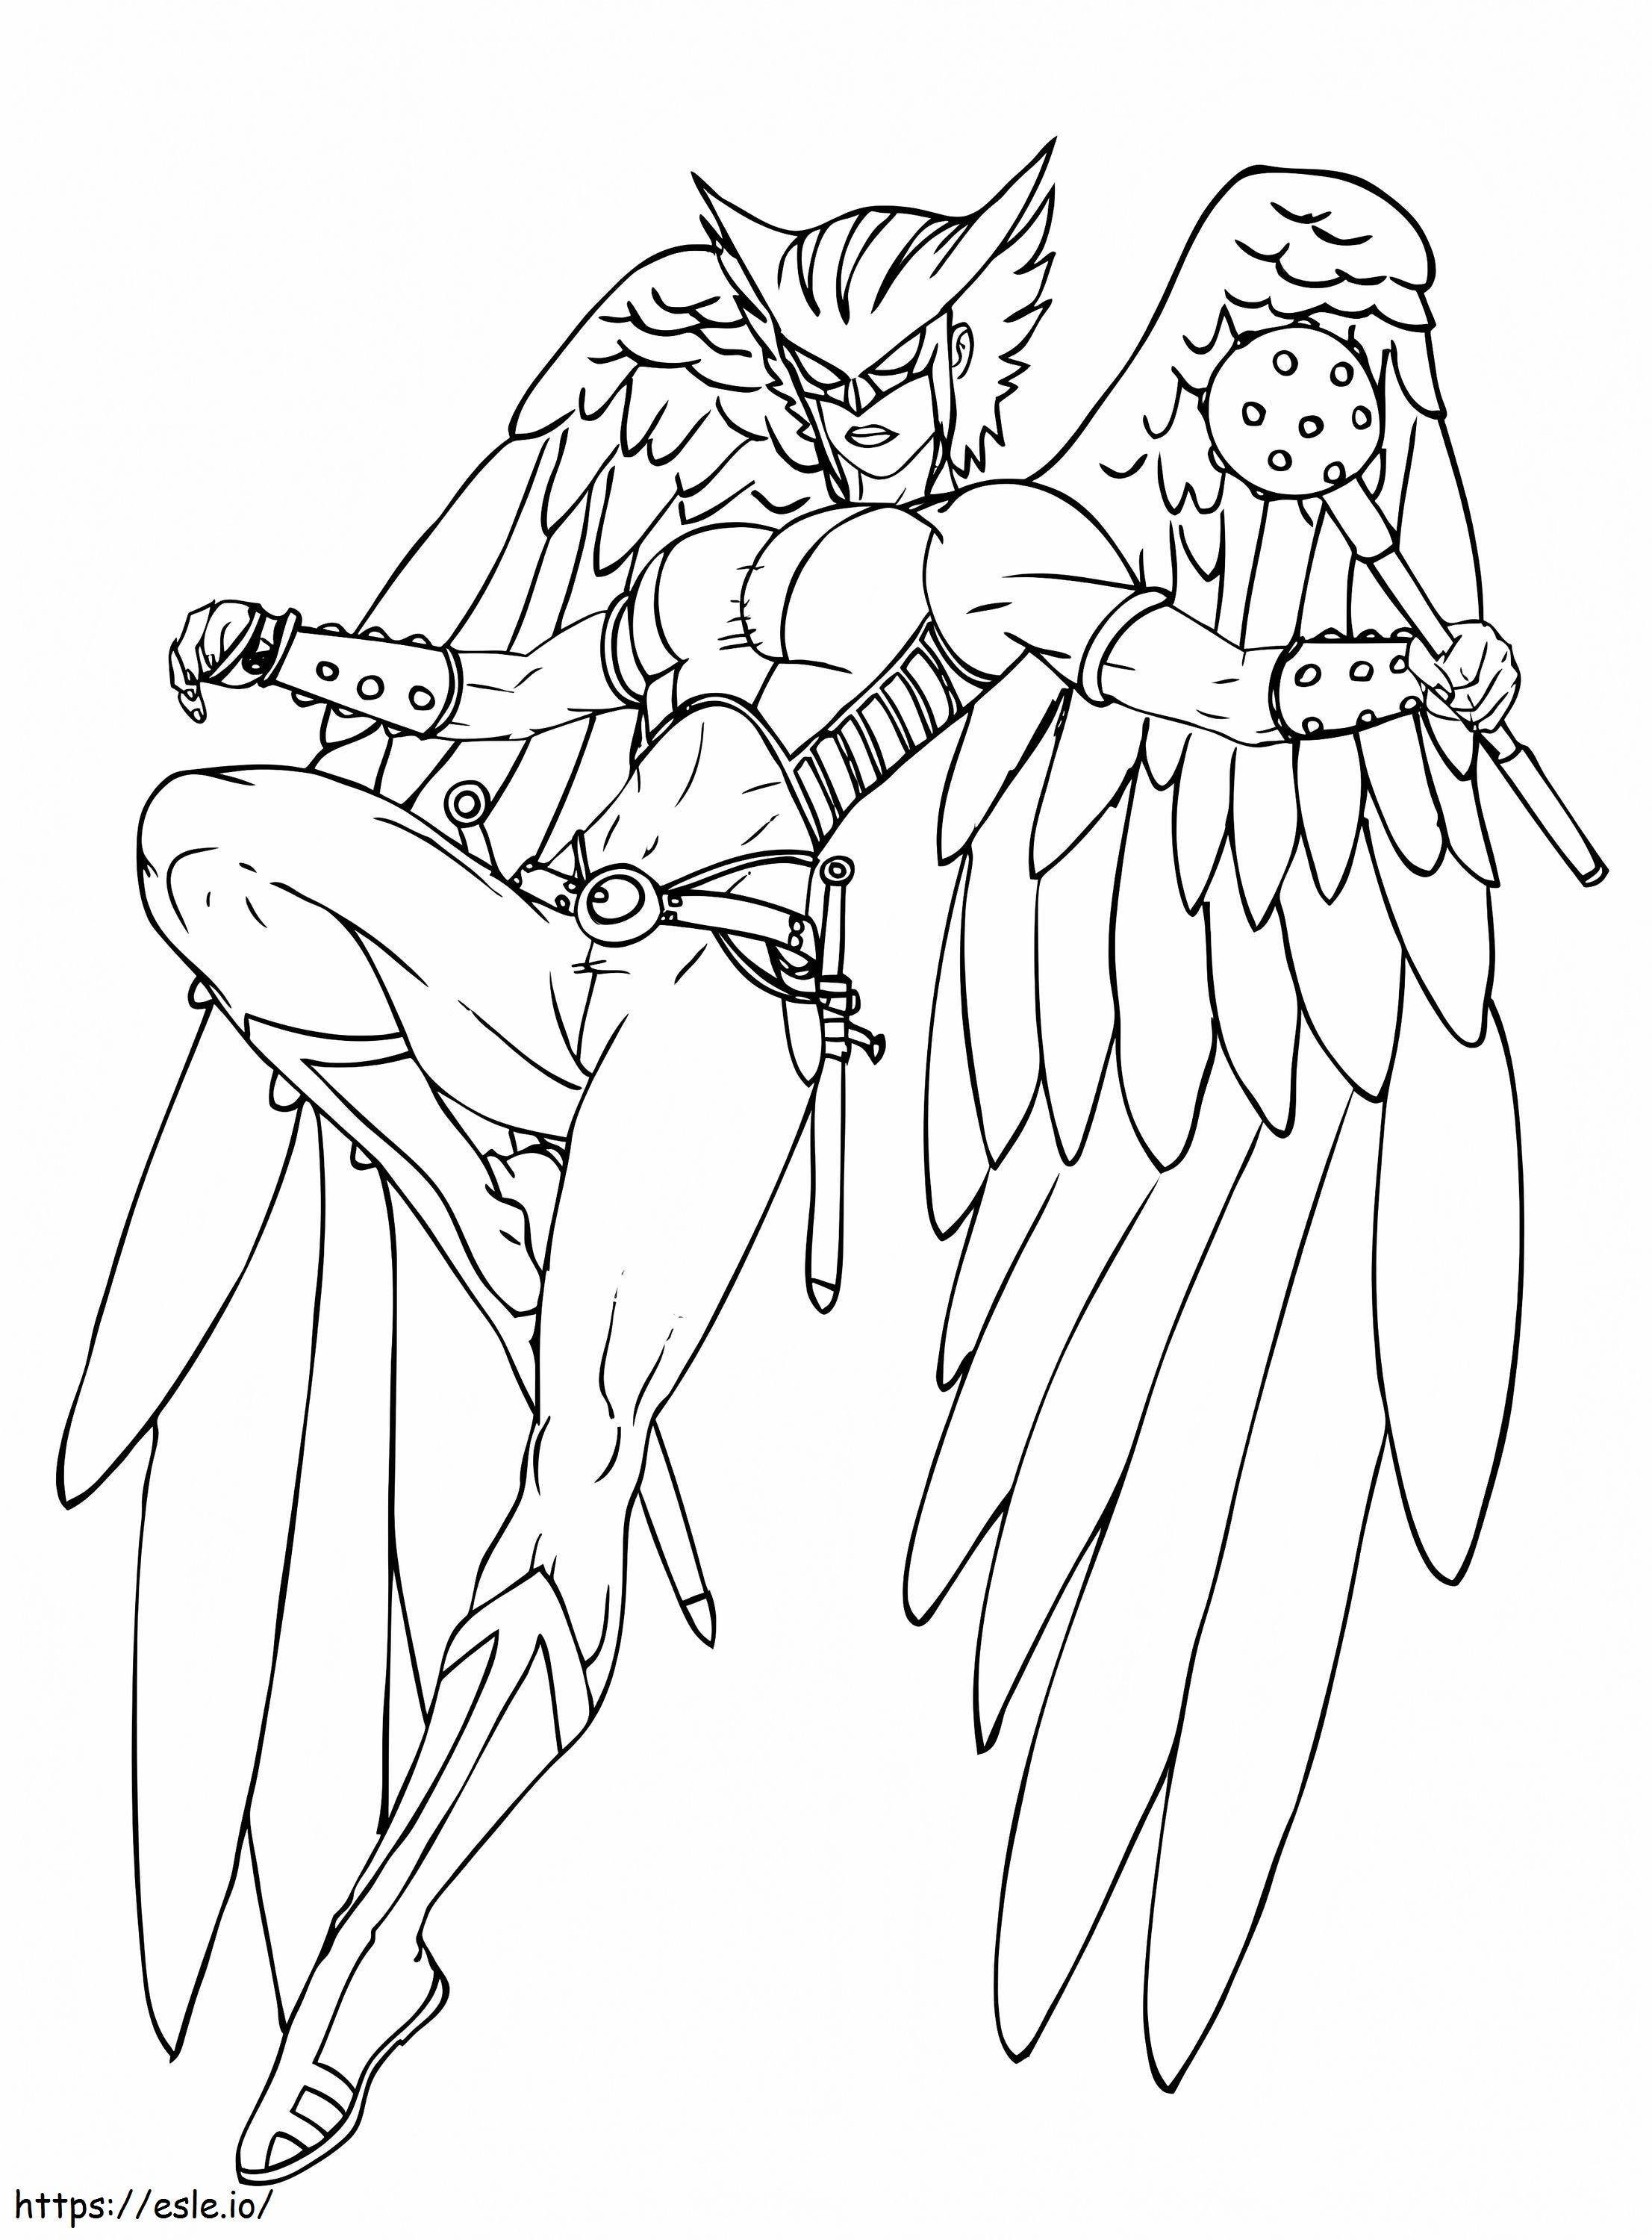 Stunning Hawkgirl coloring page